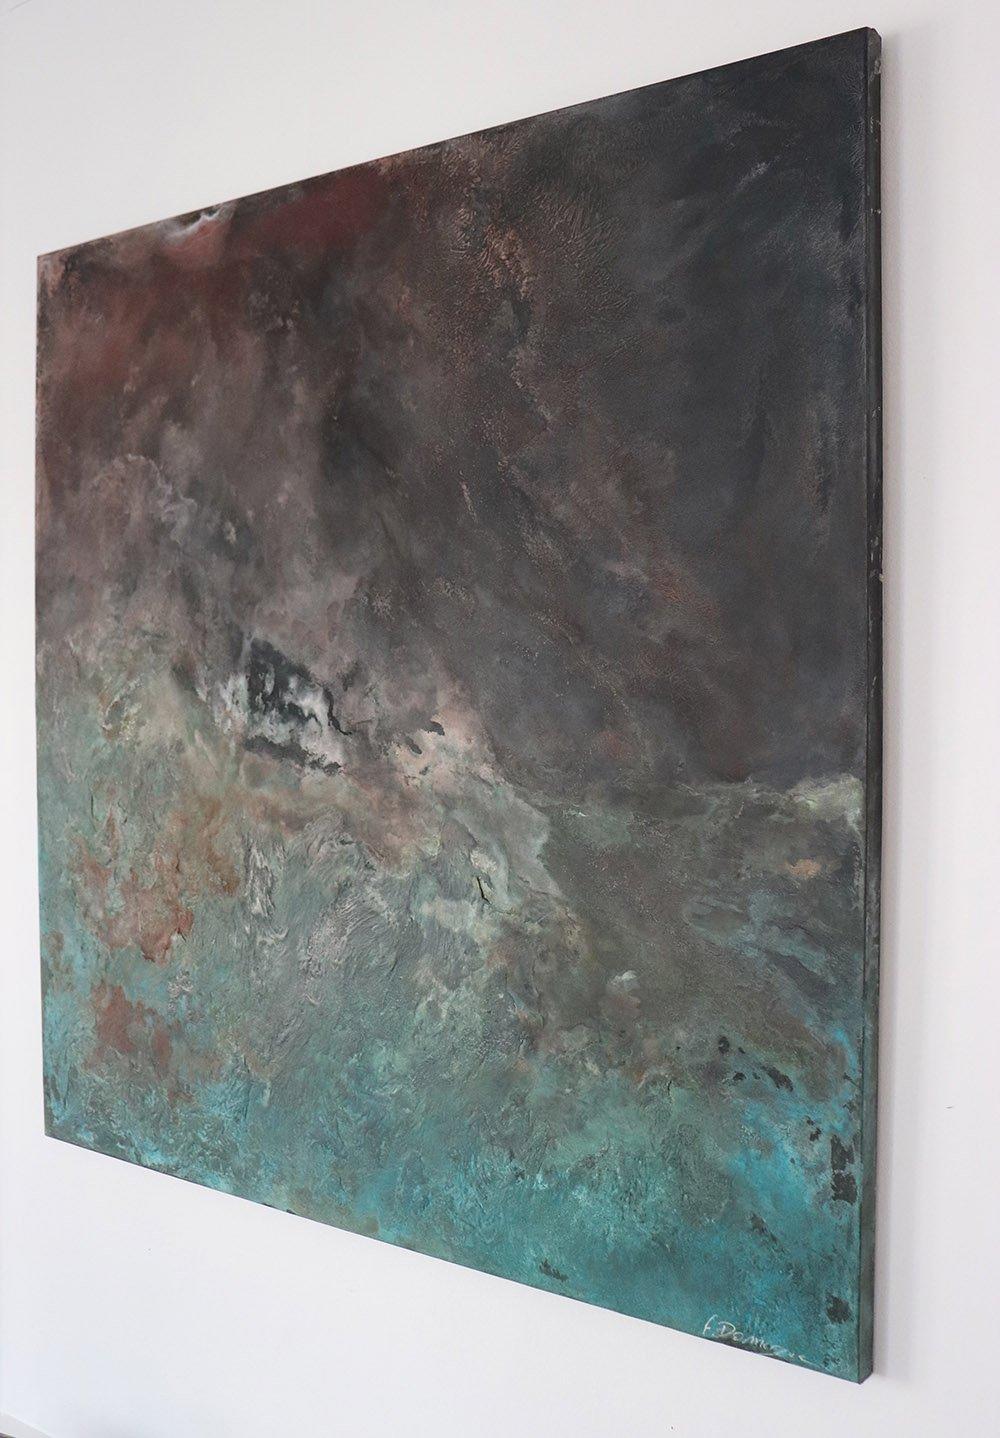 Vertigo by Frédérique Domergue - Abstract painting on metal leaves For Sale 1